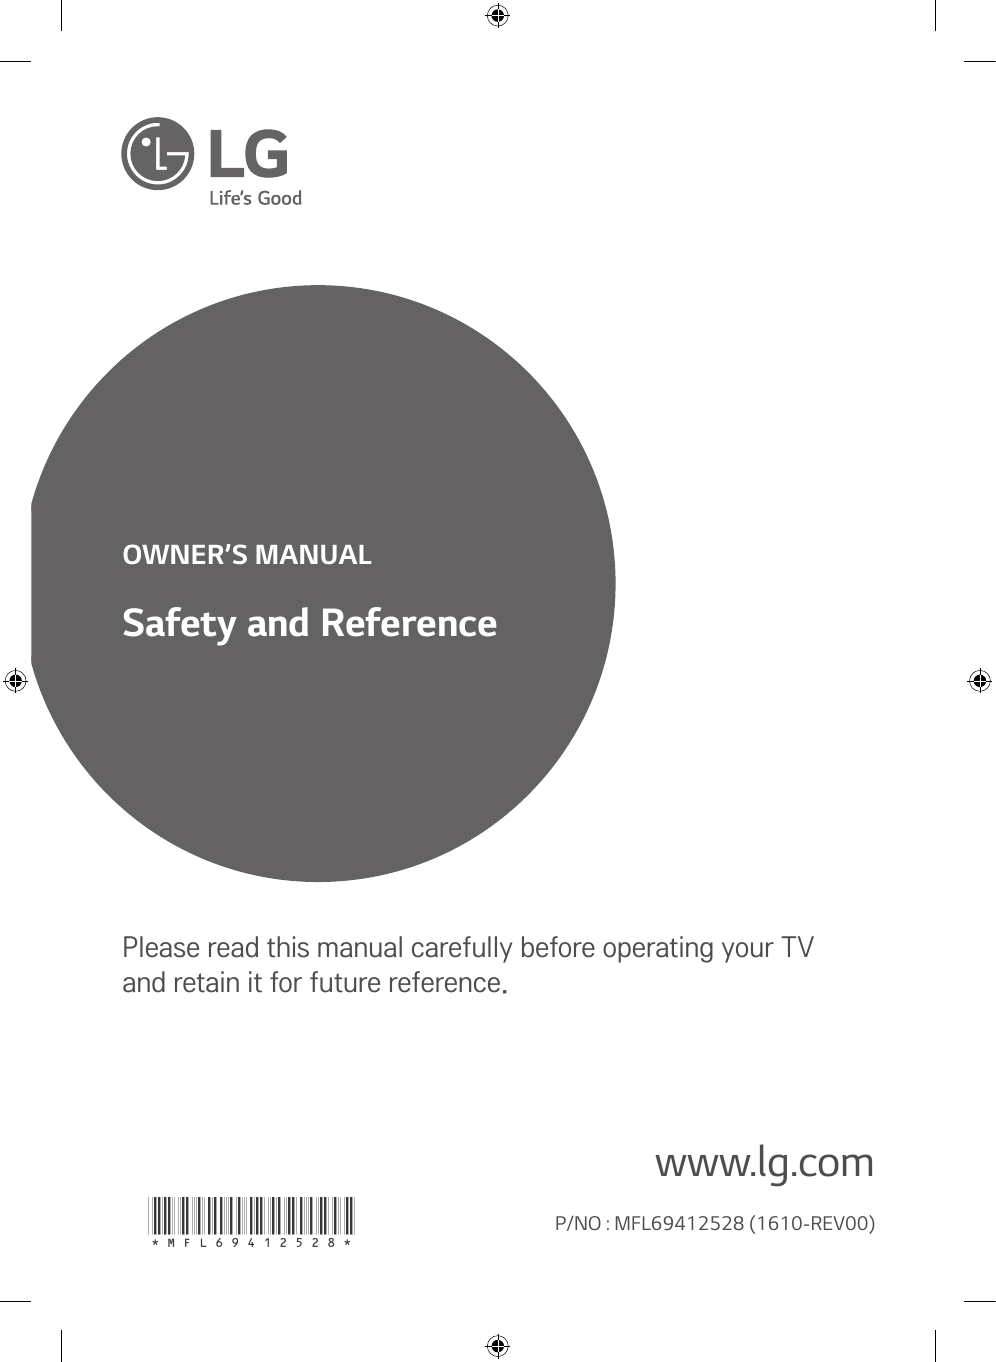 www.lg.comPlease read this manual carefully before operating your TV and retain it for future reference.Safety and ReferenceOWNER’S MANUAL*MFL69412528* P/NO : MFL69412528 (1610-REV00)